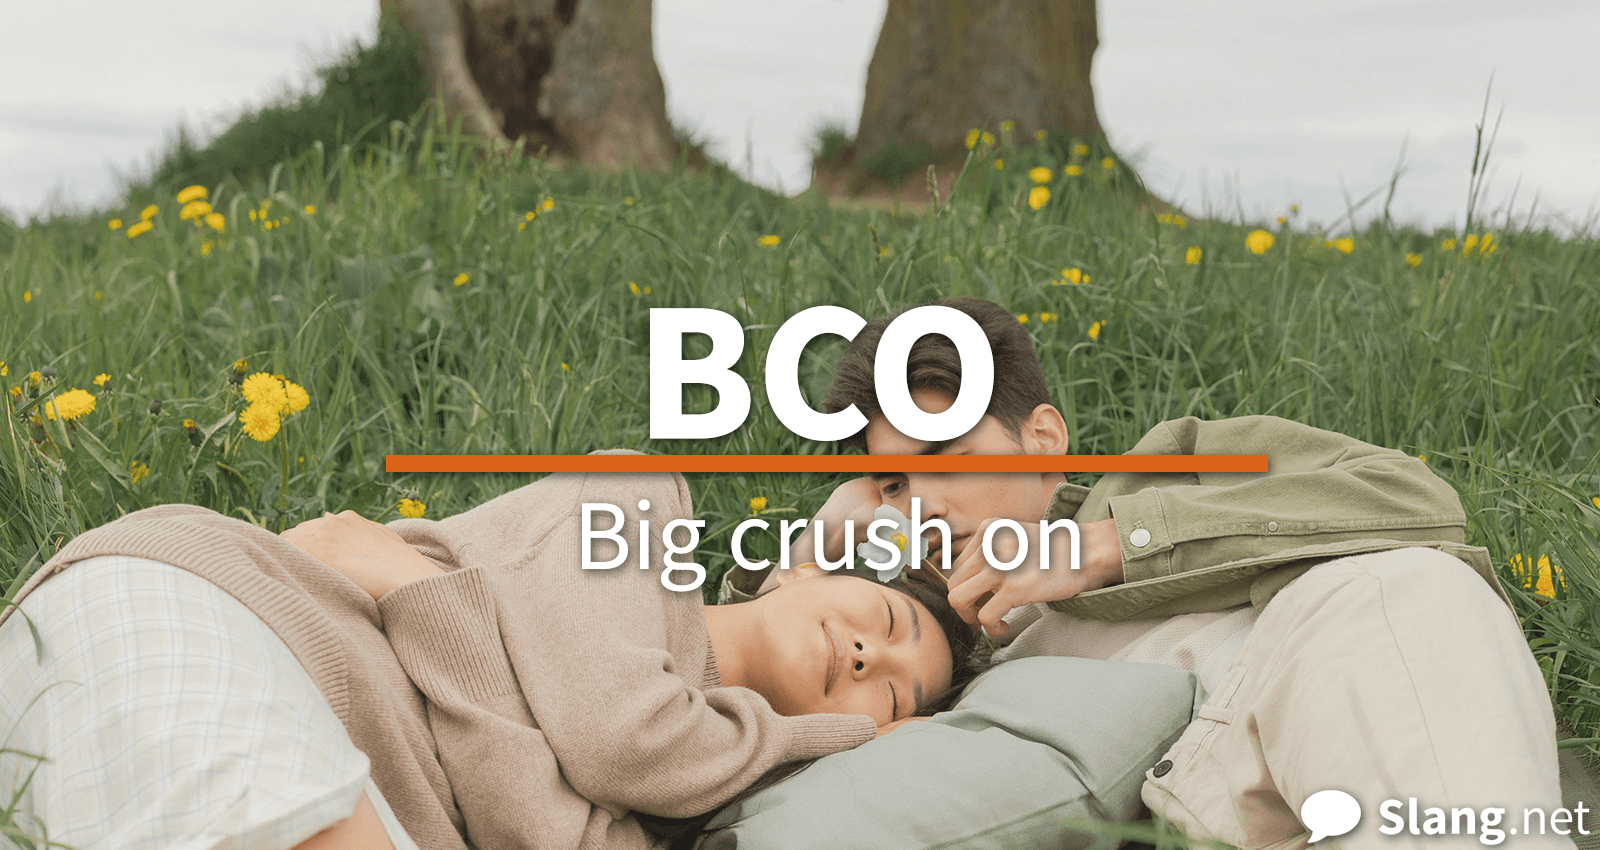 BCO stands for &quot;big crush on&quot;